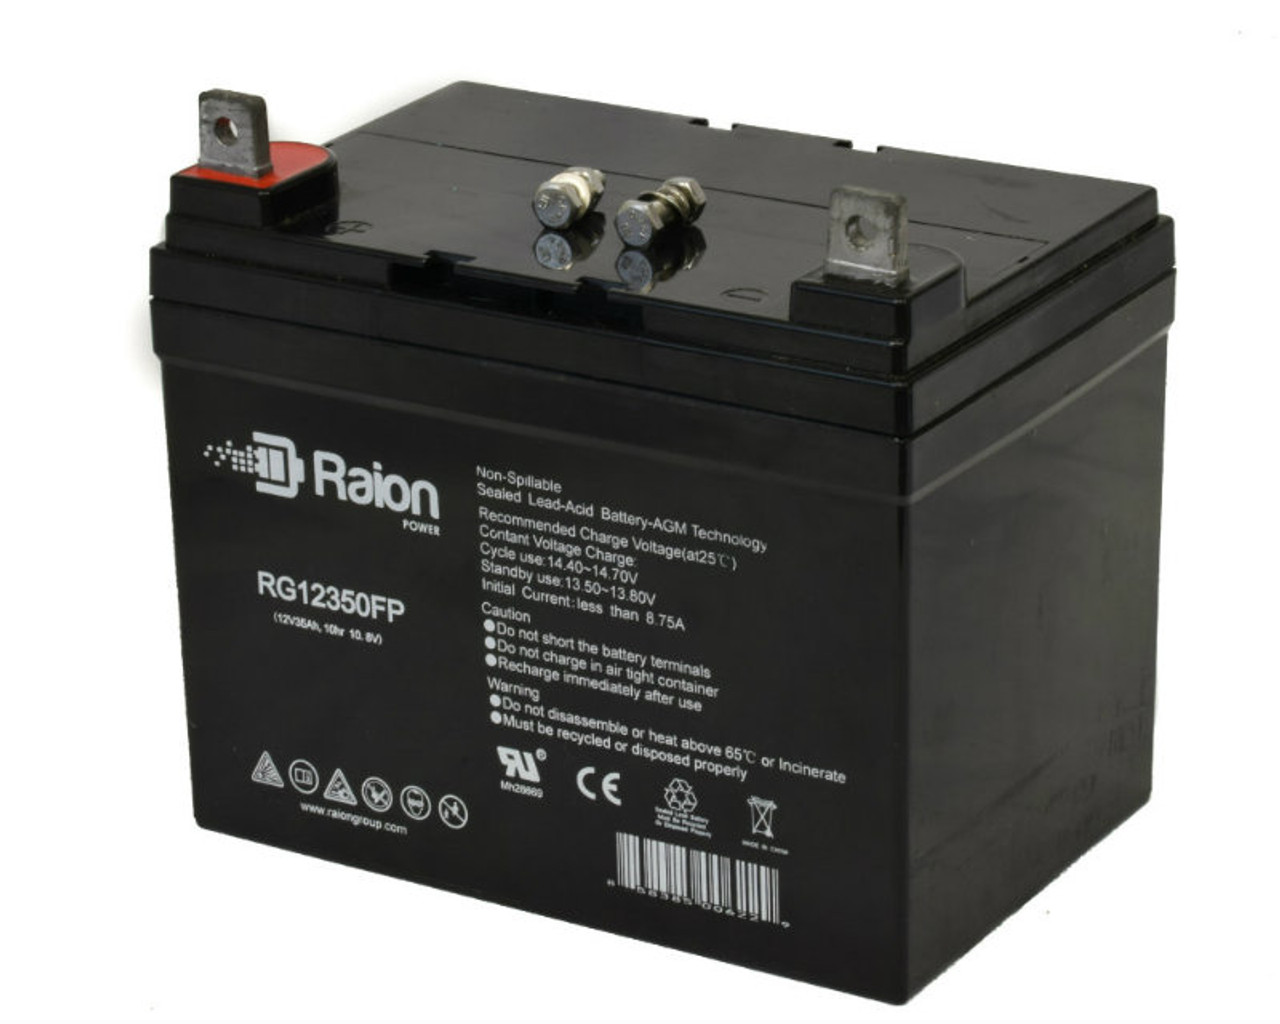 Raion Power Replacement 12V 35Ah RG12350FP Battery for Yard Machines 13AQ762F700